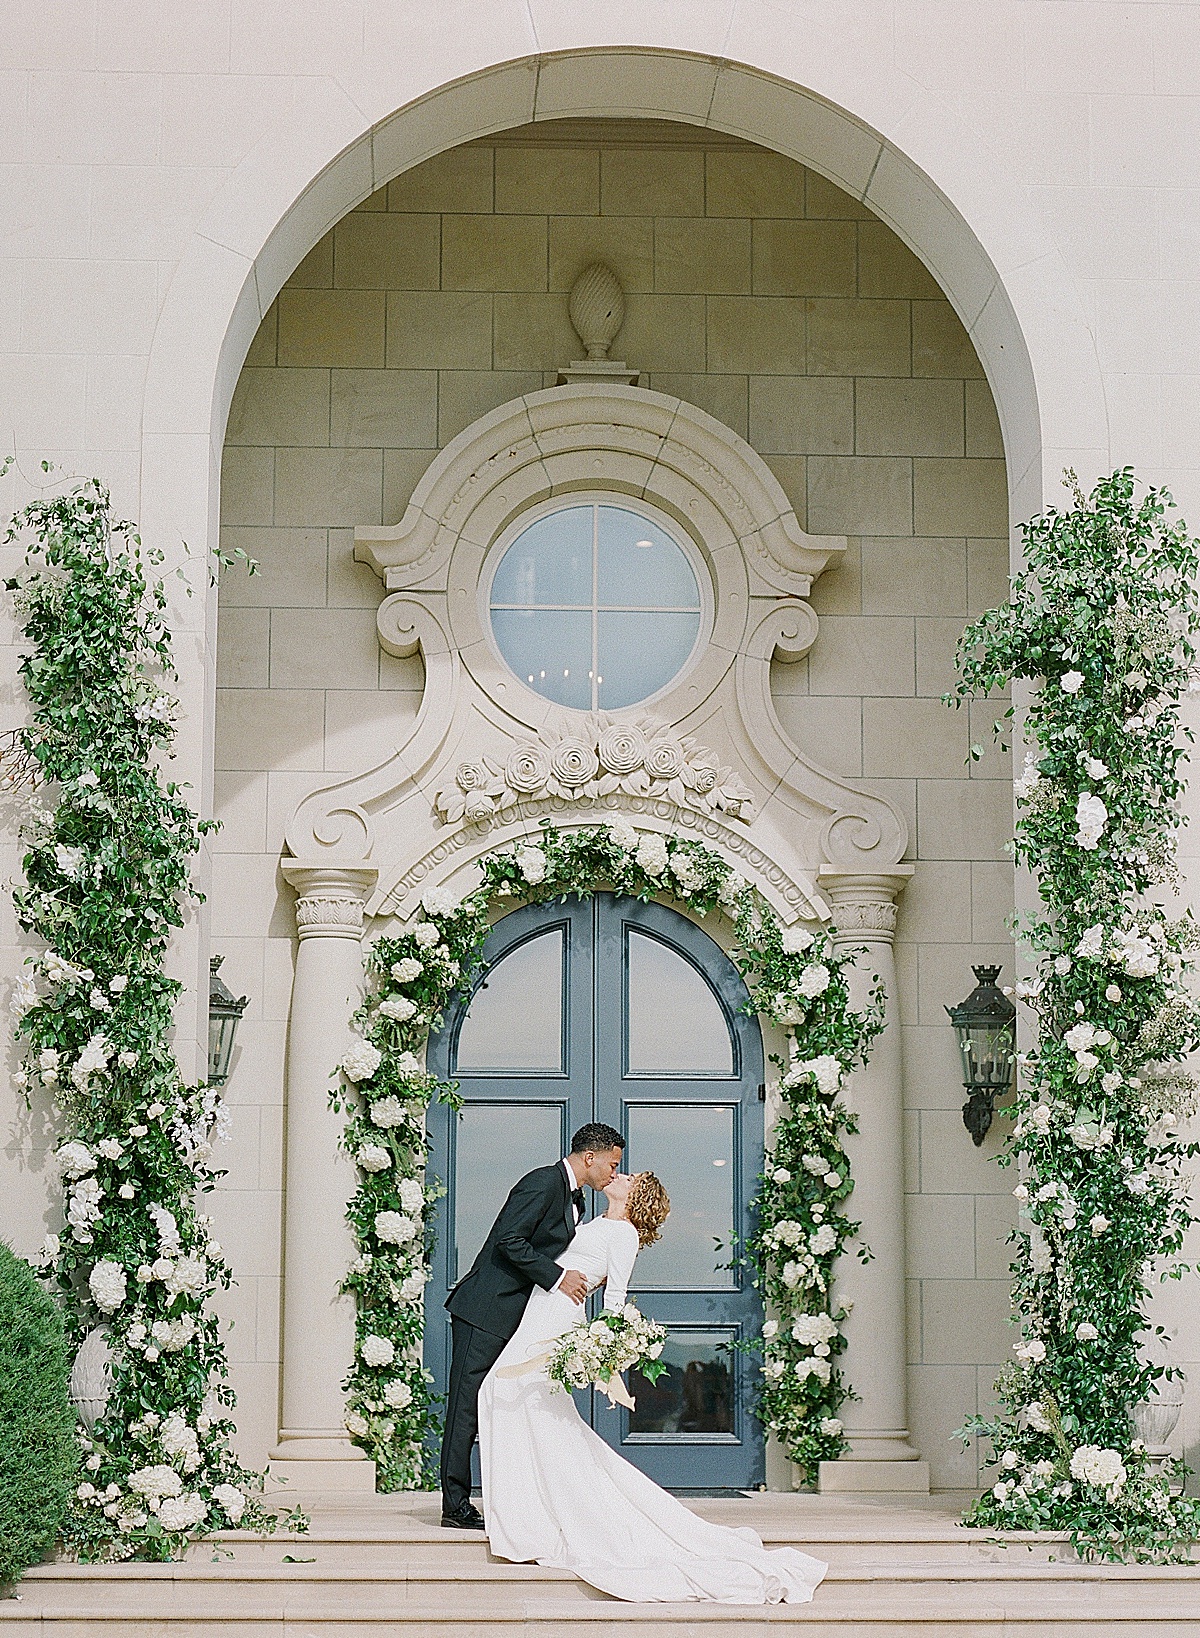 Groom Dipping and Kissing Bride In front of The Olana Wedding Venue's Grand Entrance 